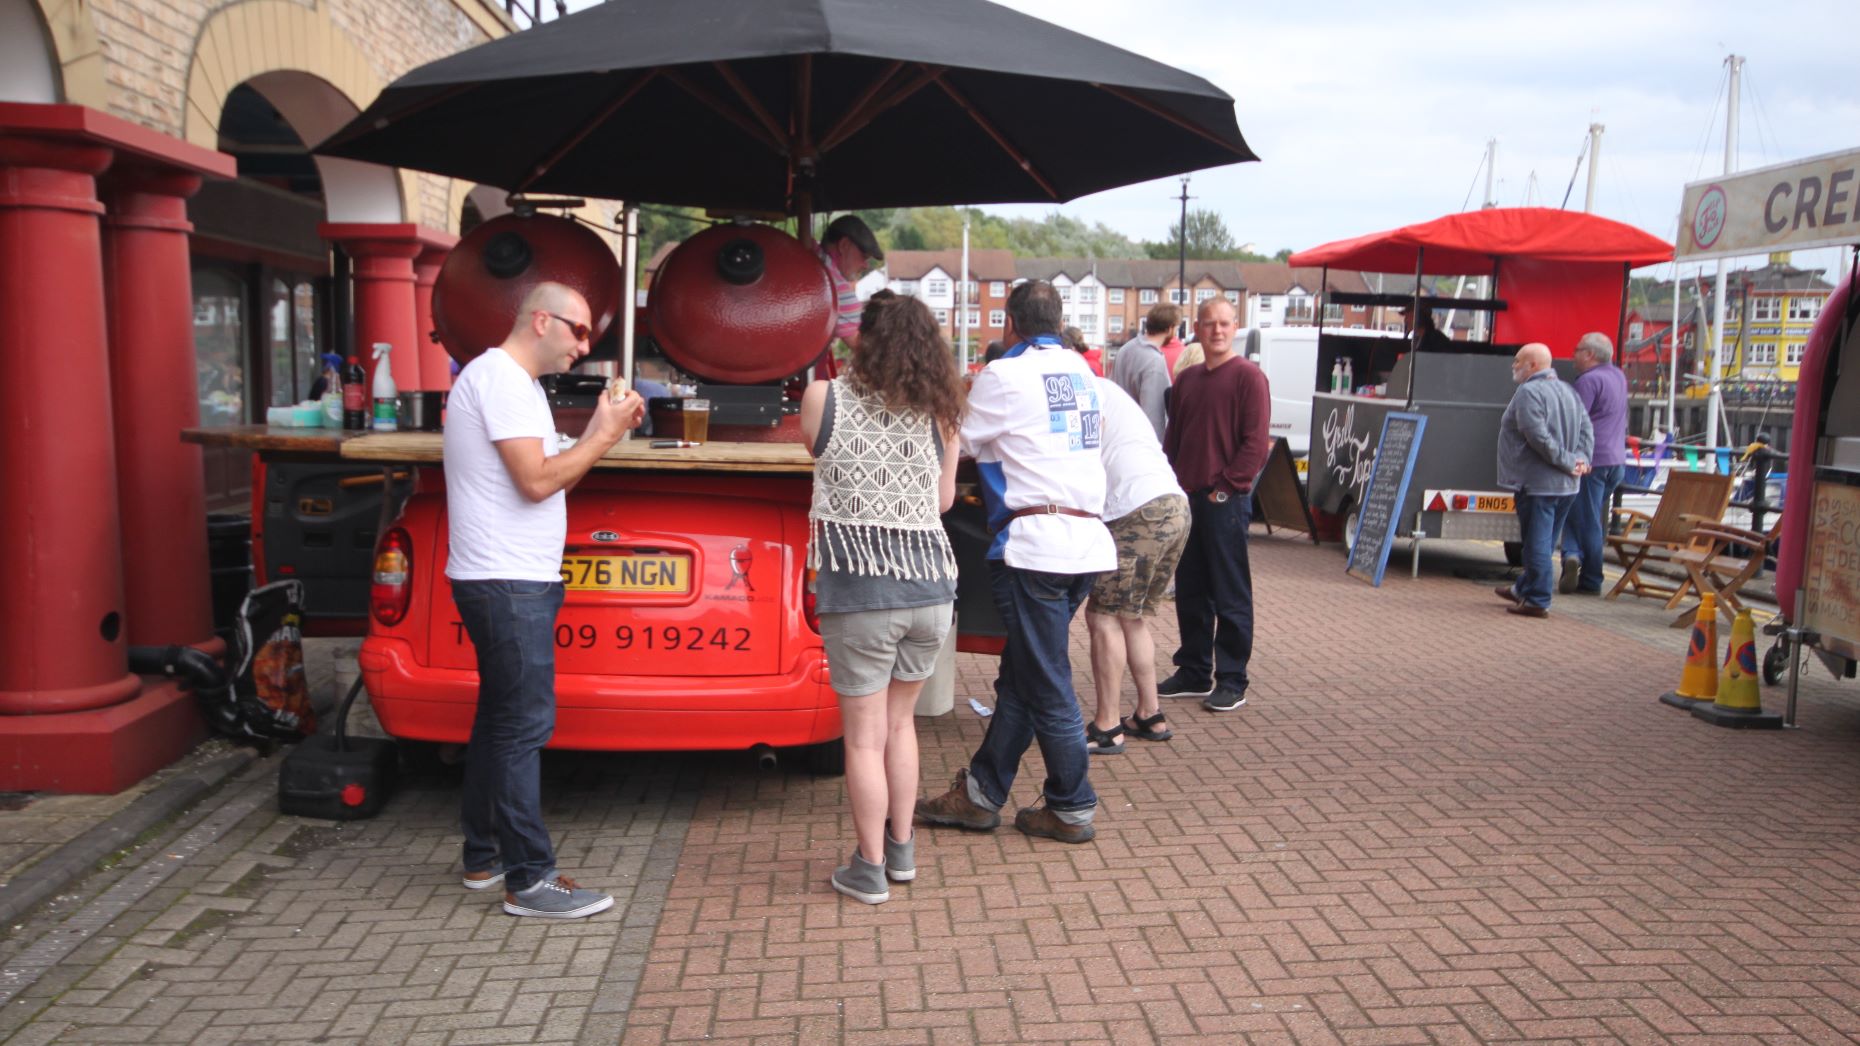 St Peter's Fete, The Barbecue Cab Company